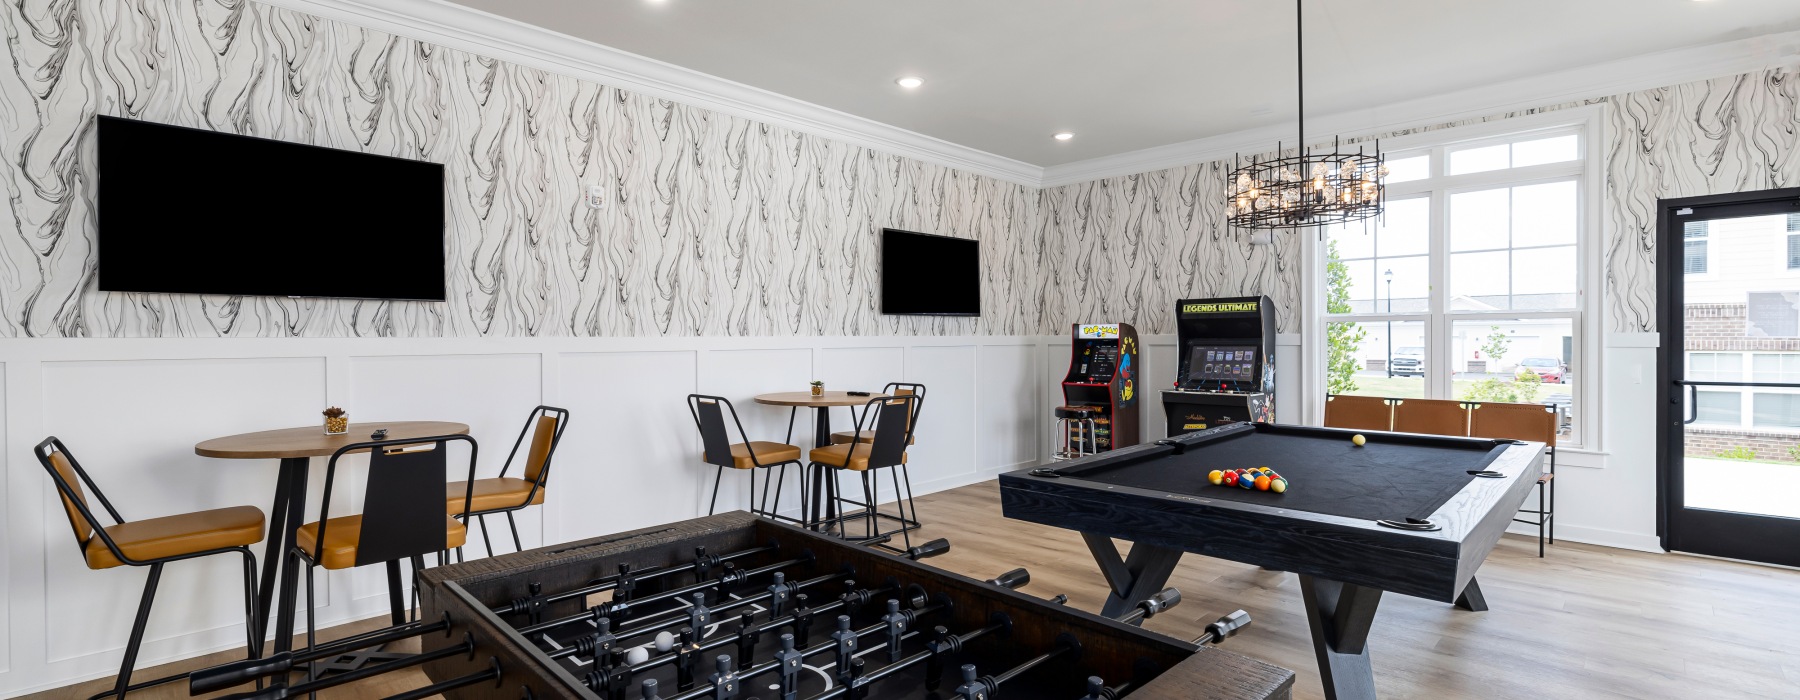 game room with tvs, pool table, arcade games and seating